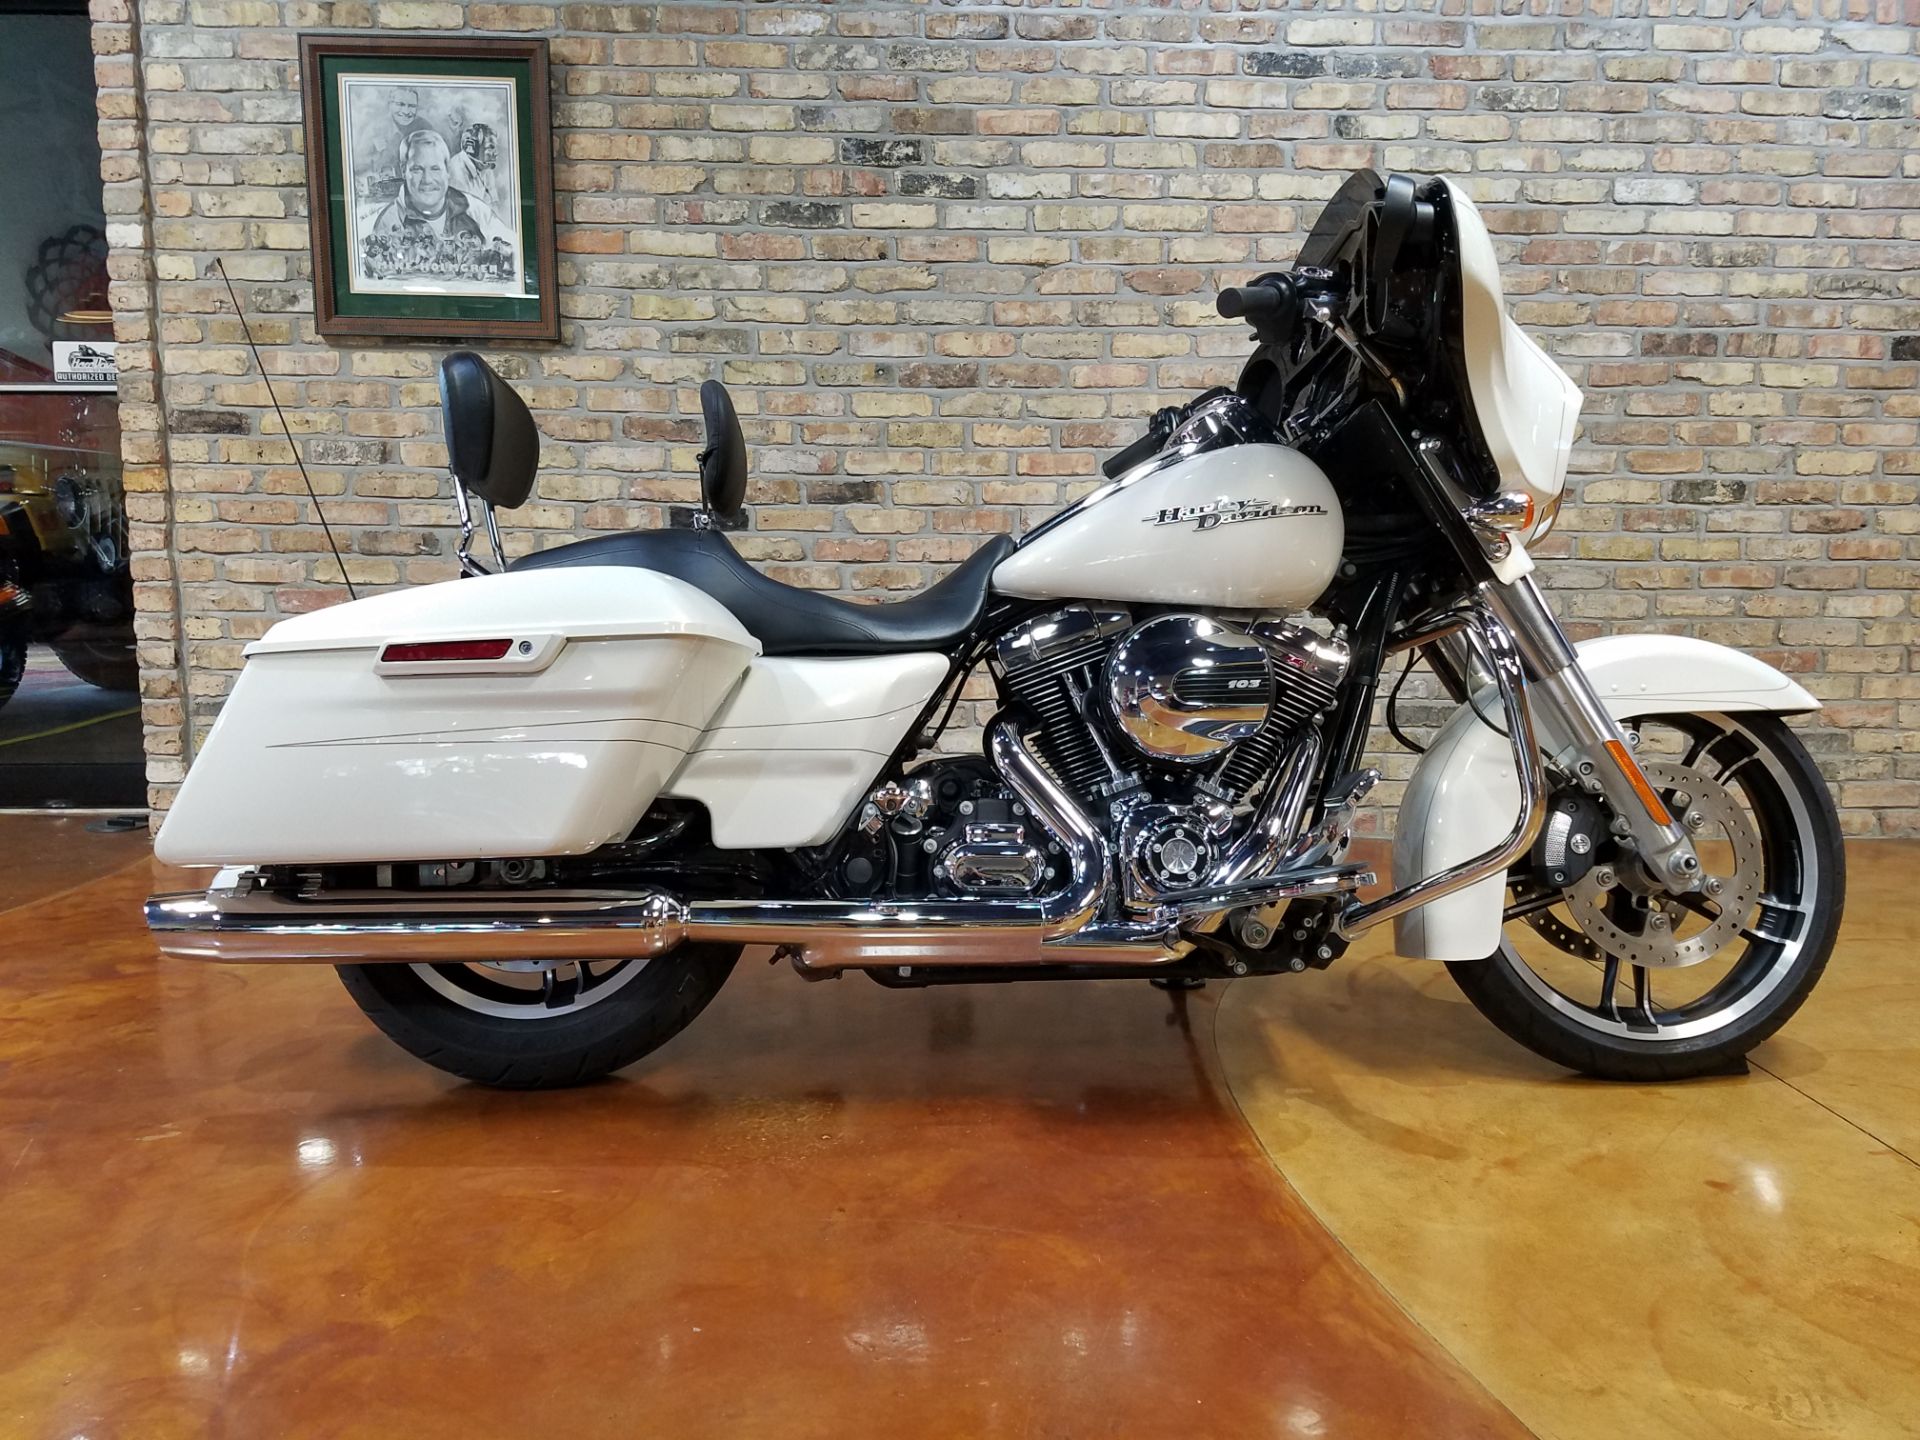 Used 2015 Harley Davidson Street Glide Special Motorcycles In Big Bend Wi 4436 Morocco Gold Pearl